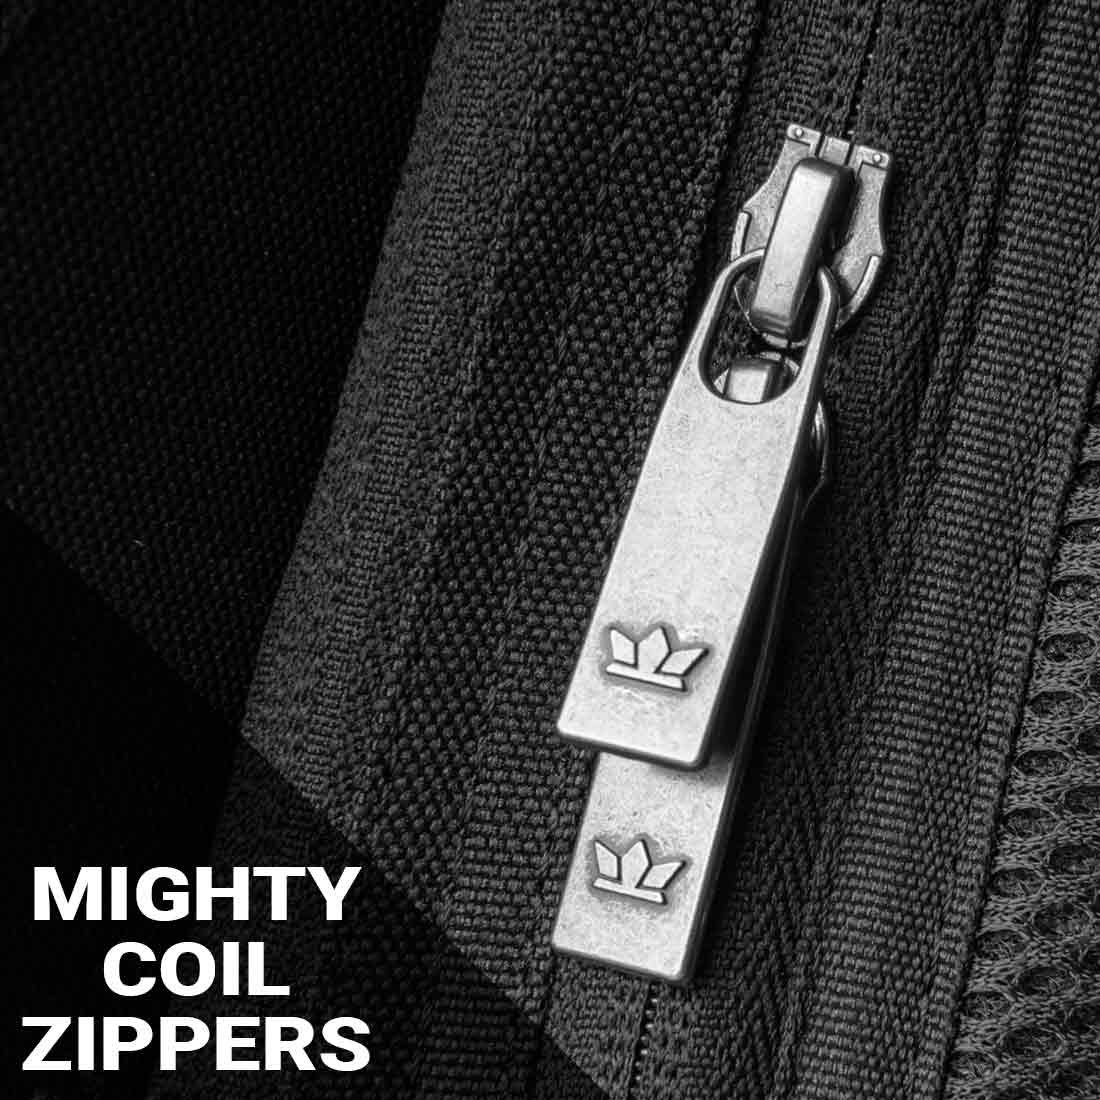 Xator - 25 litres, Anti-Theft Laptop backpack (15.6 inch laptops) ⋆ Mighty Zippers